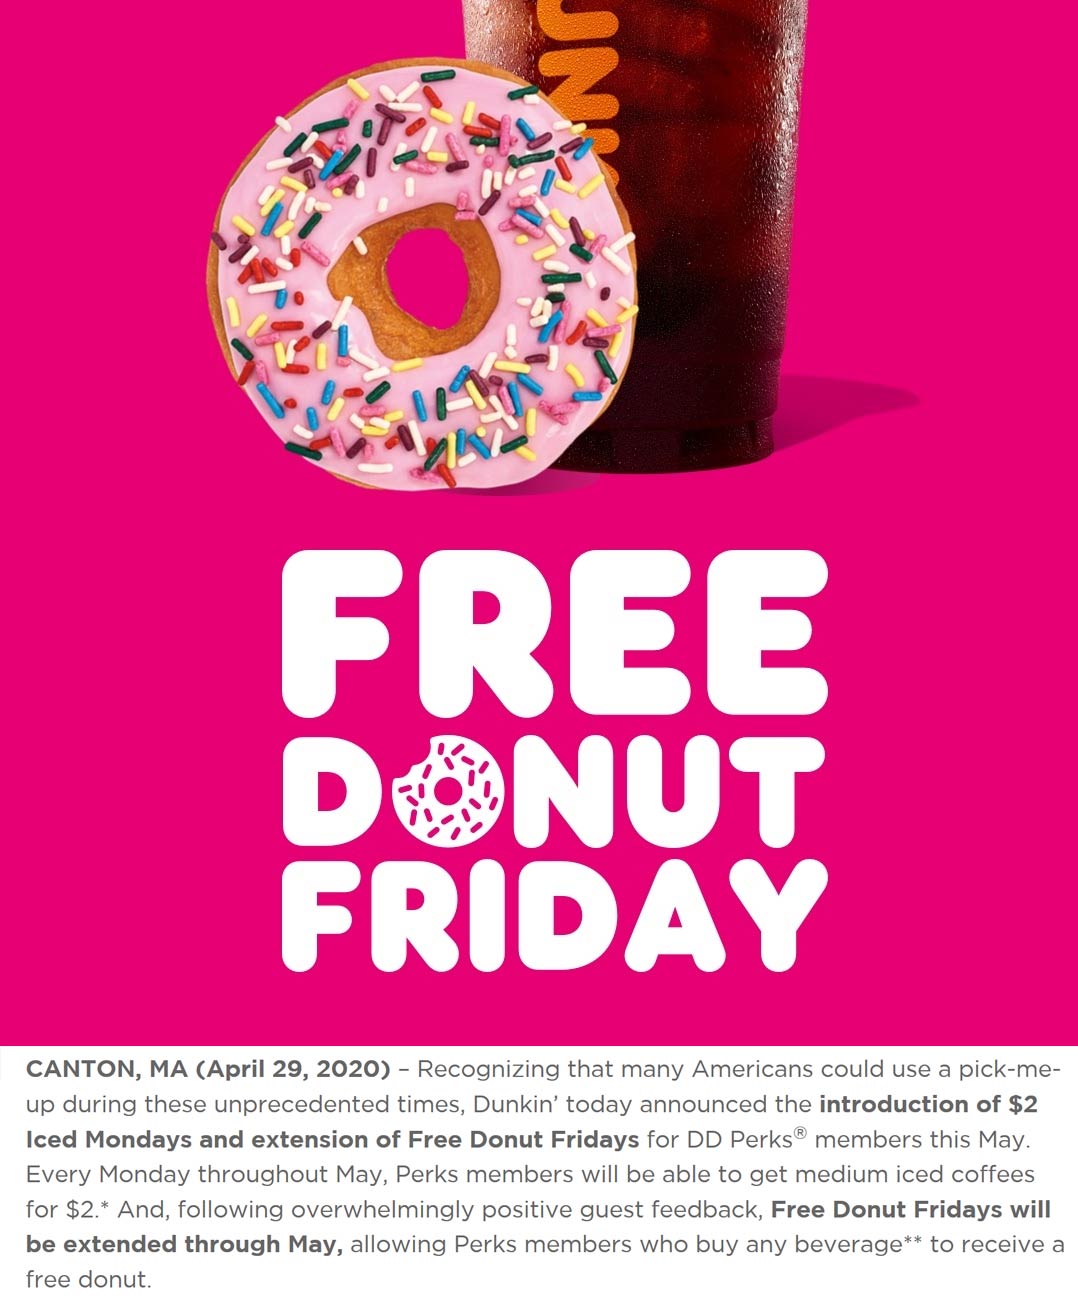 Free doughnut with your beverage Fridays at Dunkin Donuts dunkin The